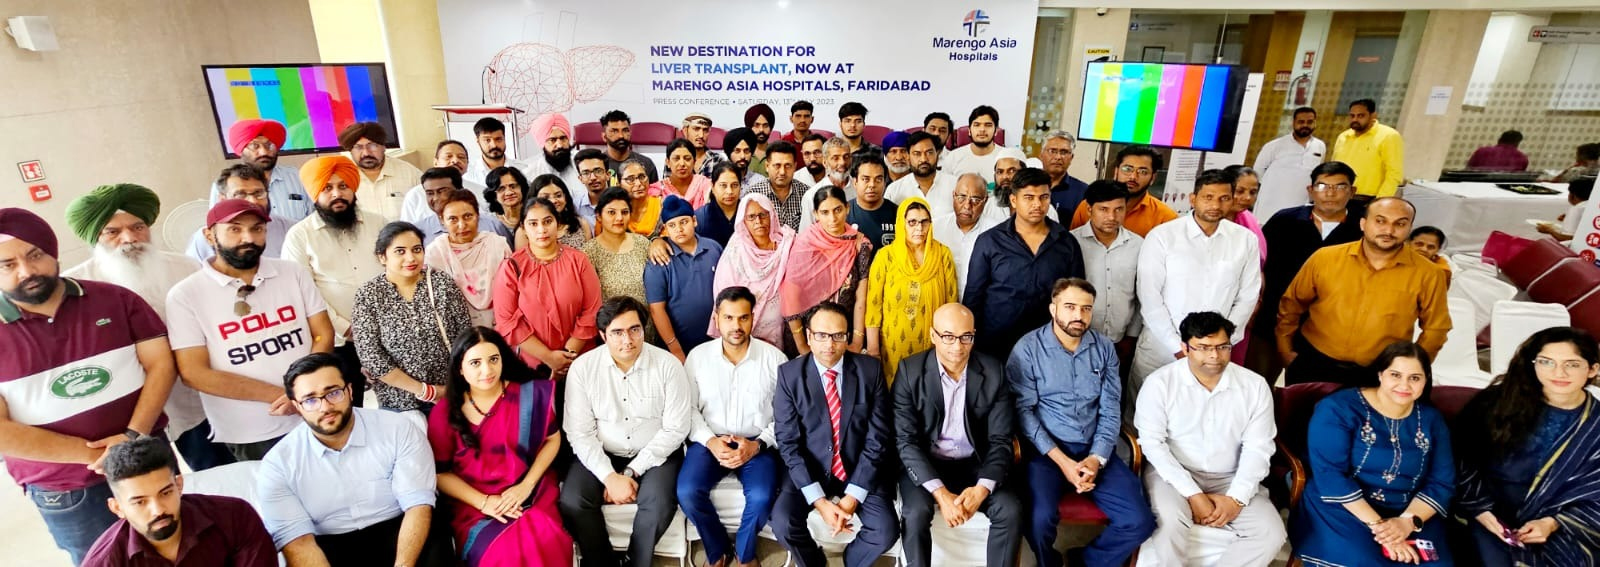 Maringo Asia Hospitals Faridabad 'Celebrates Successful Liver Transplantation' by inviting patients to share their experiences and raise awareness